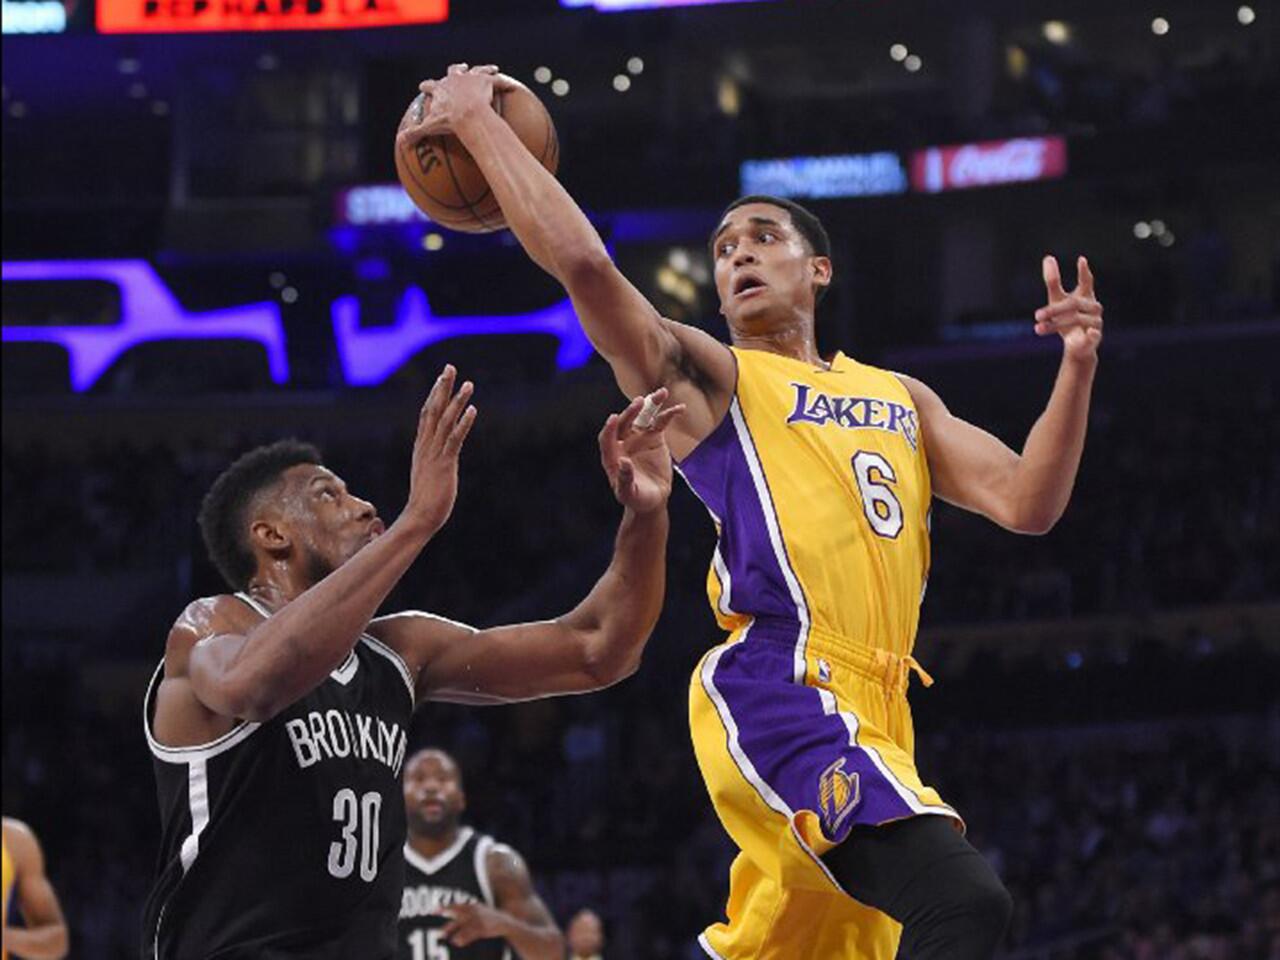 Lakers guard Jordan Clarkson passes the ball behind him while under pressure from Nets forward Thaddeus Young during the first half of a game on March 1.